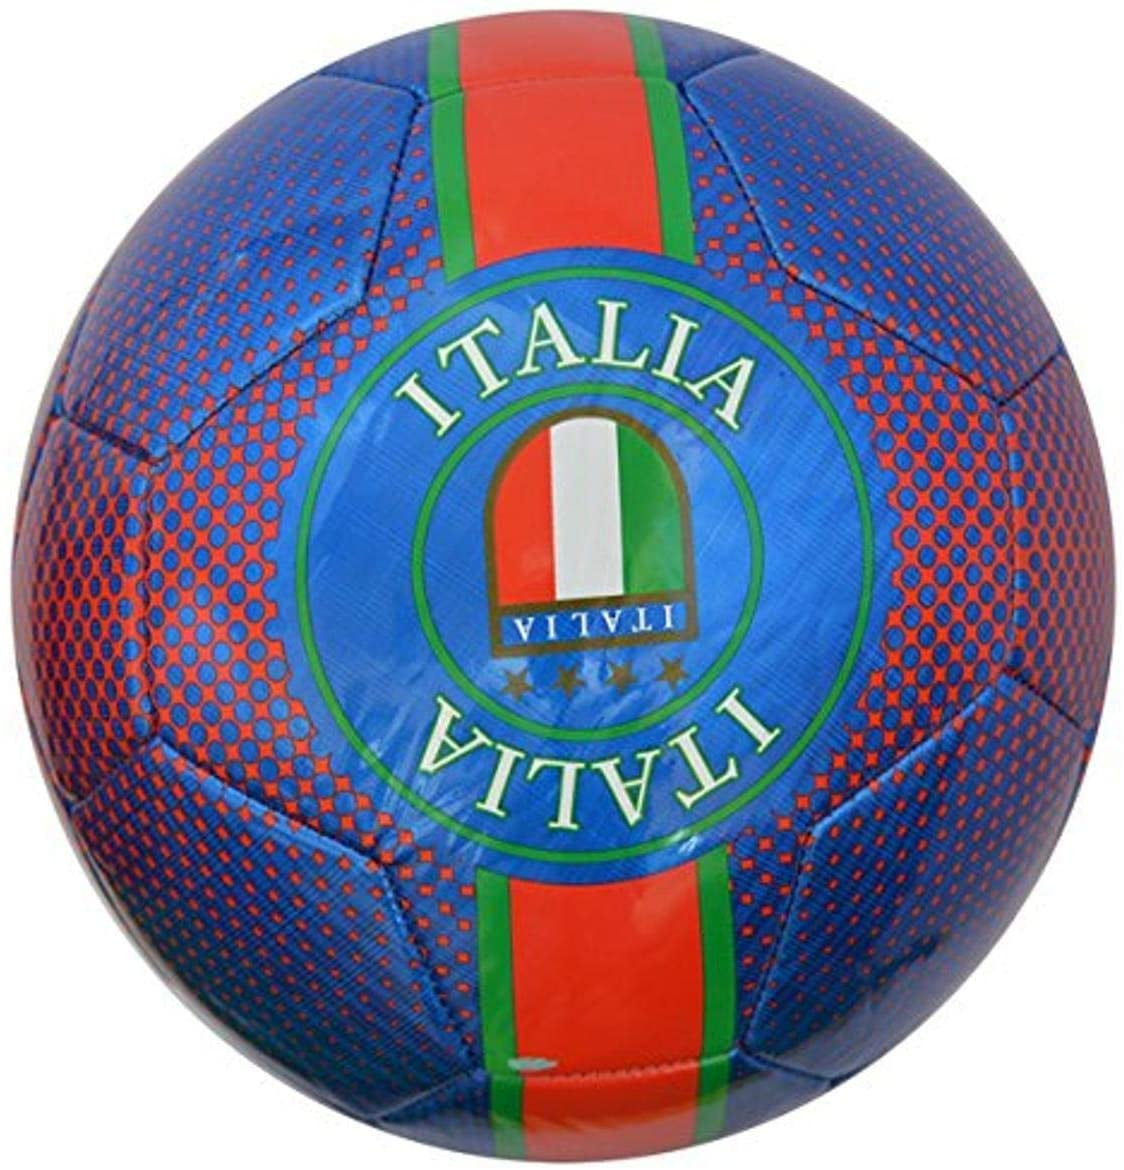 Italia Soccer Ball Durable Foot Ball Official Size 5 Blue/Green/Red